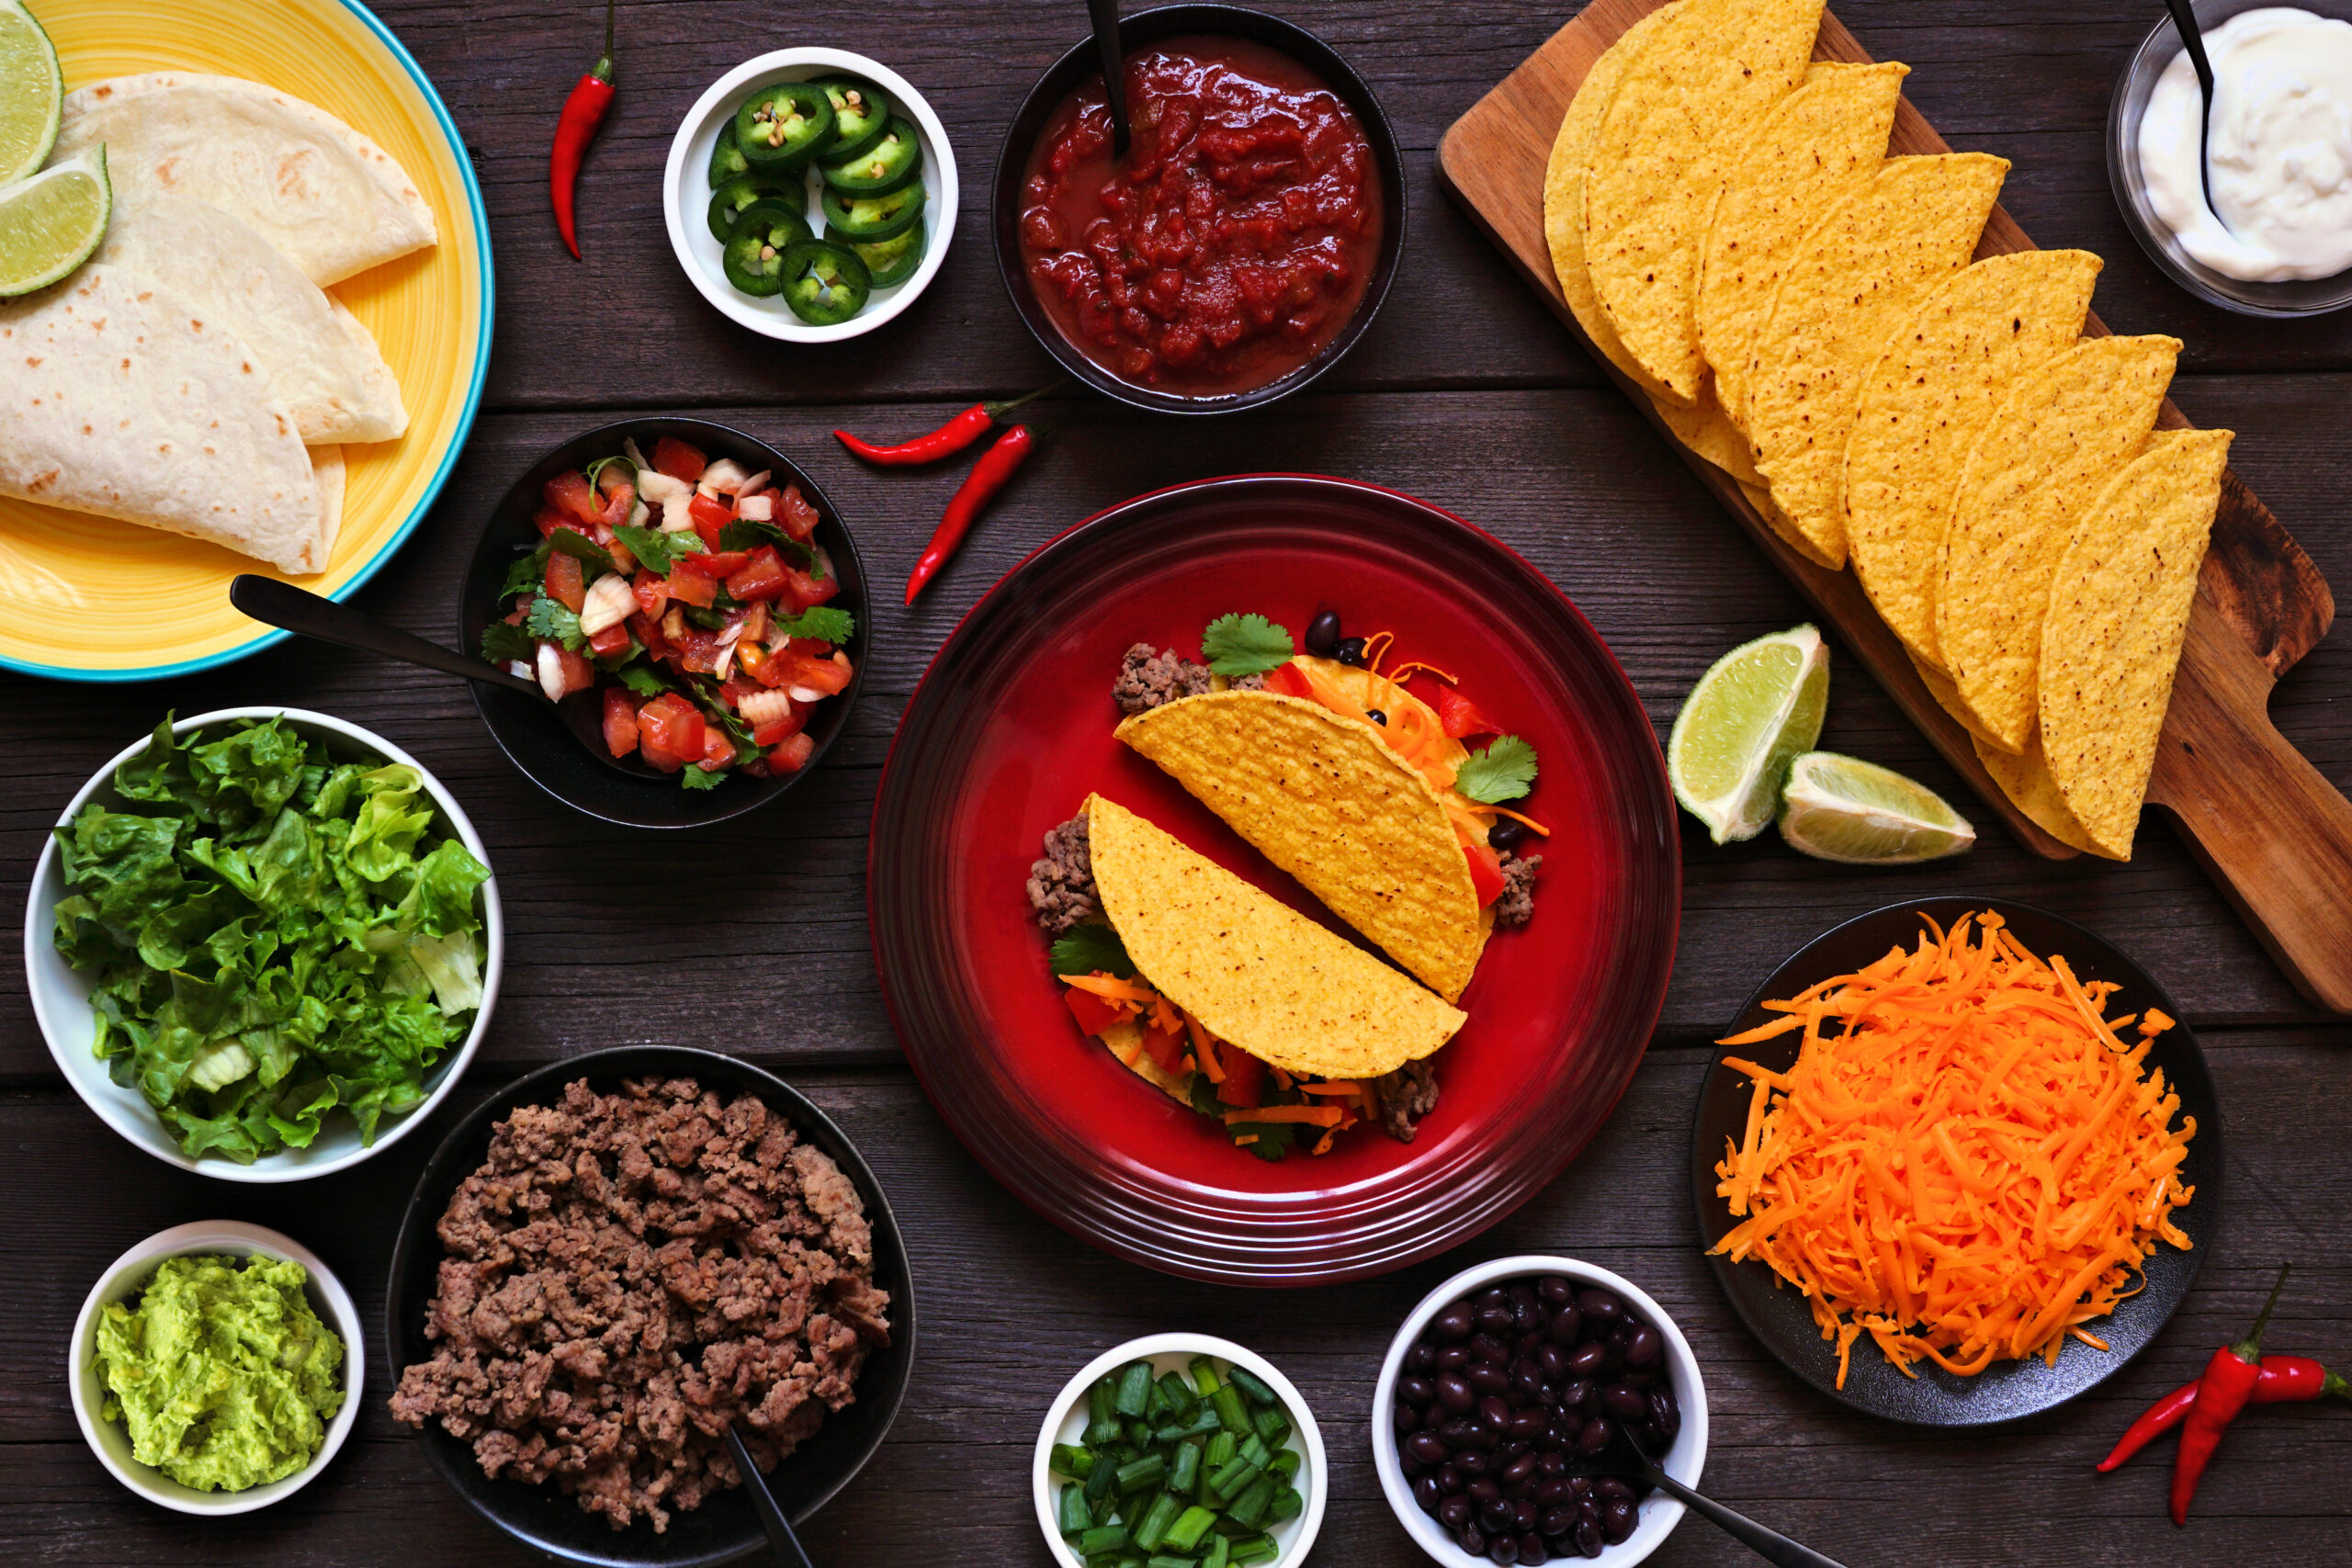 Taco bar table scene with a selection of ingredients. Above view on a dark wood background. Mexican food buffet.